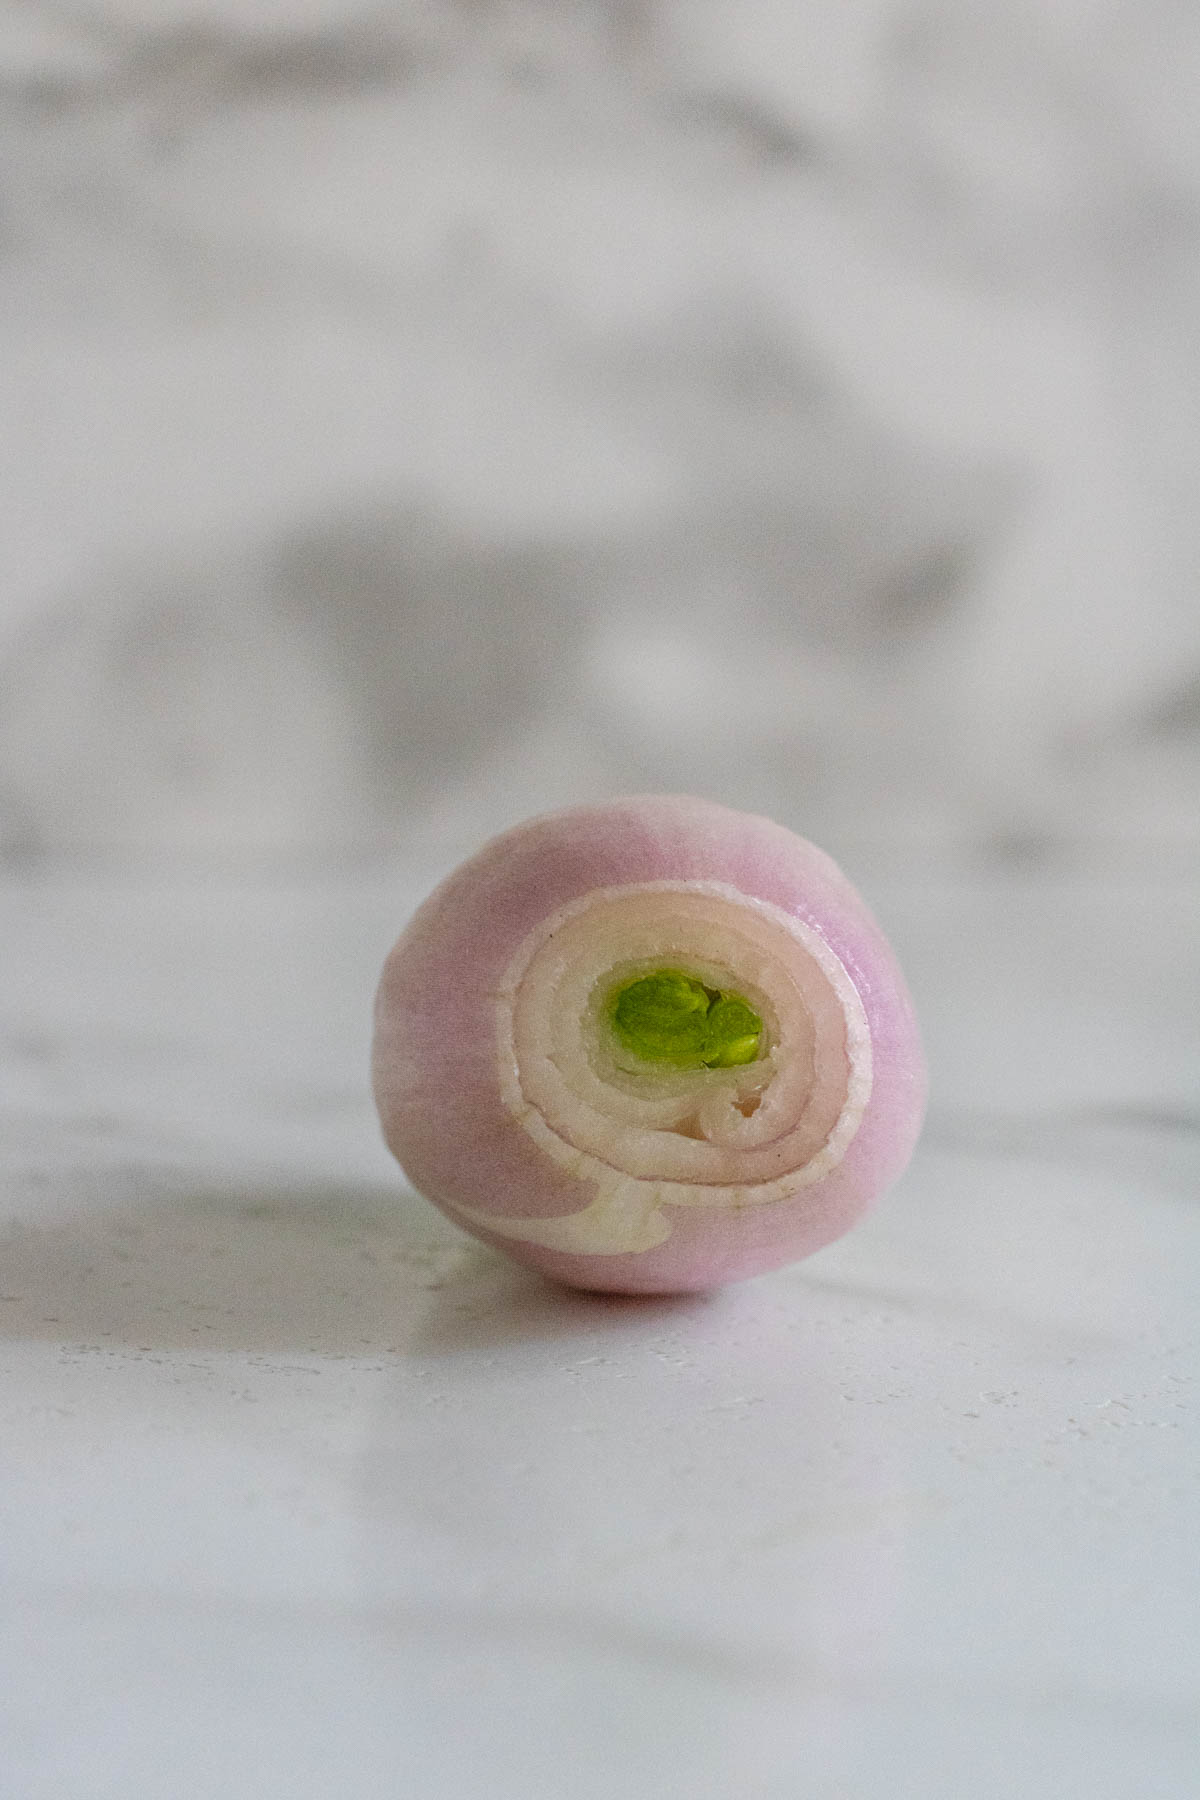 A peeled shallot with a side view of its rings.